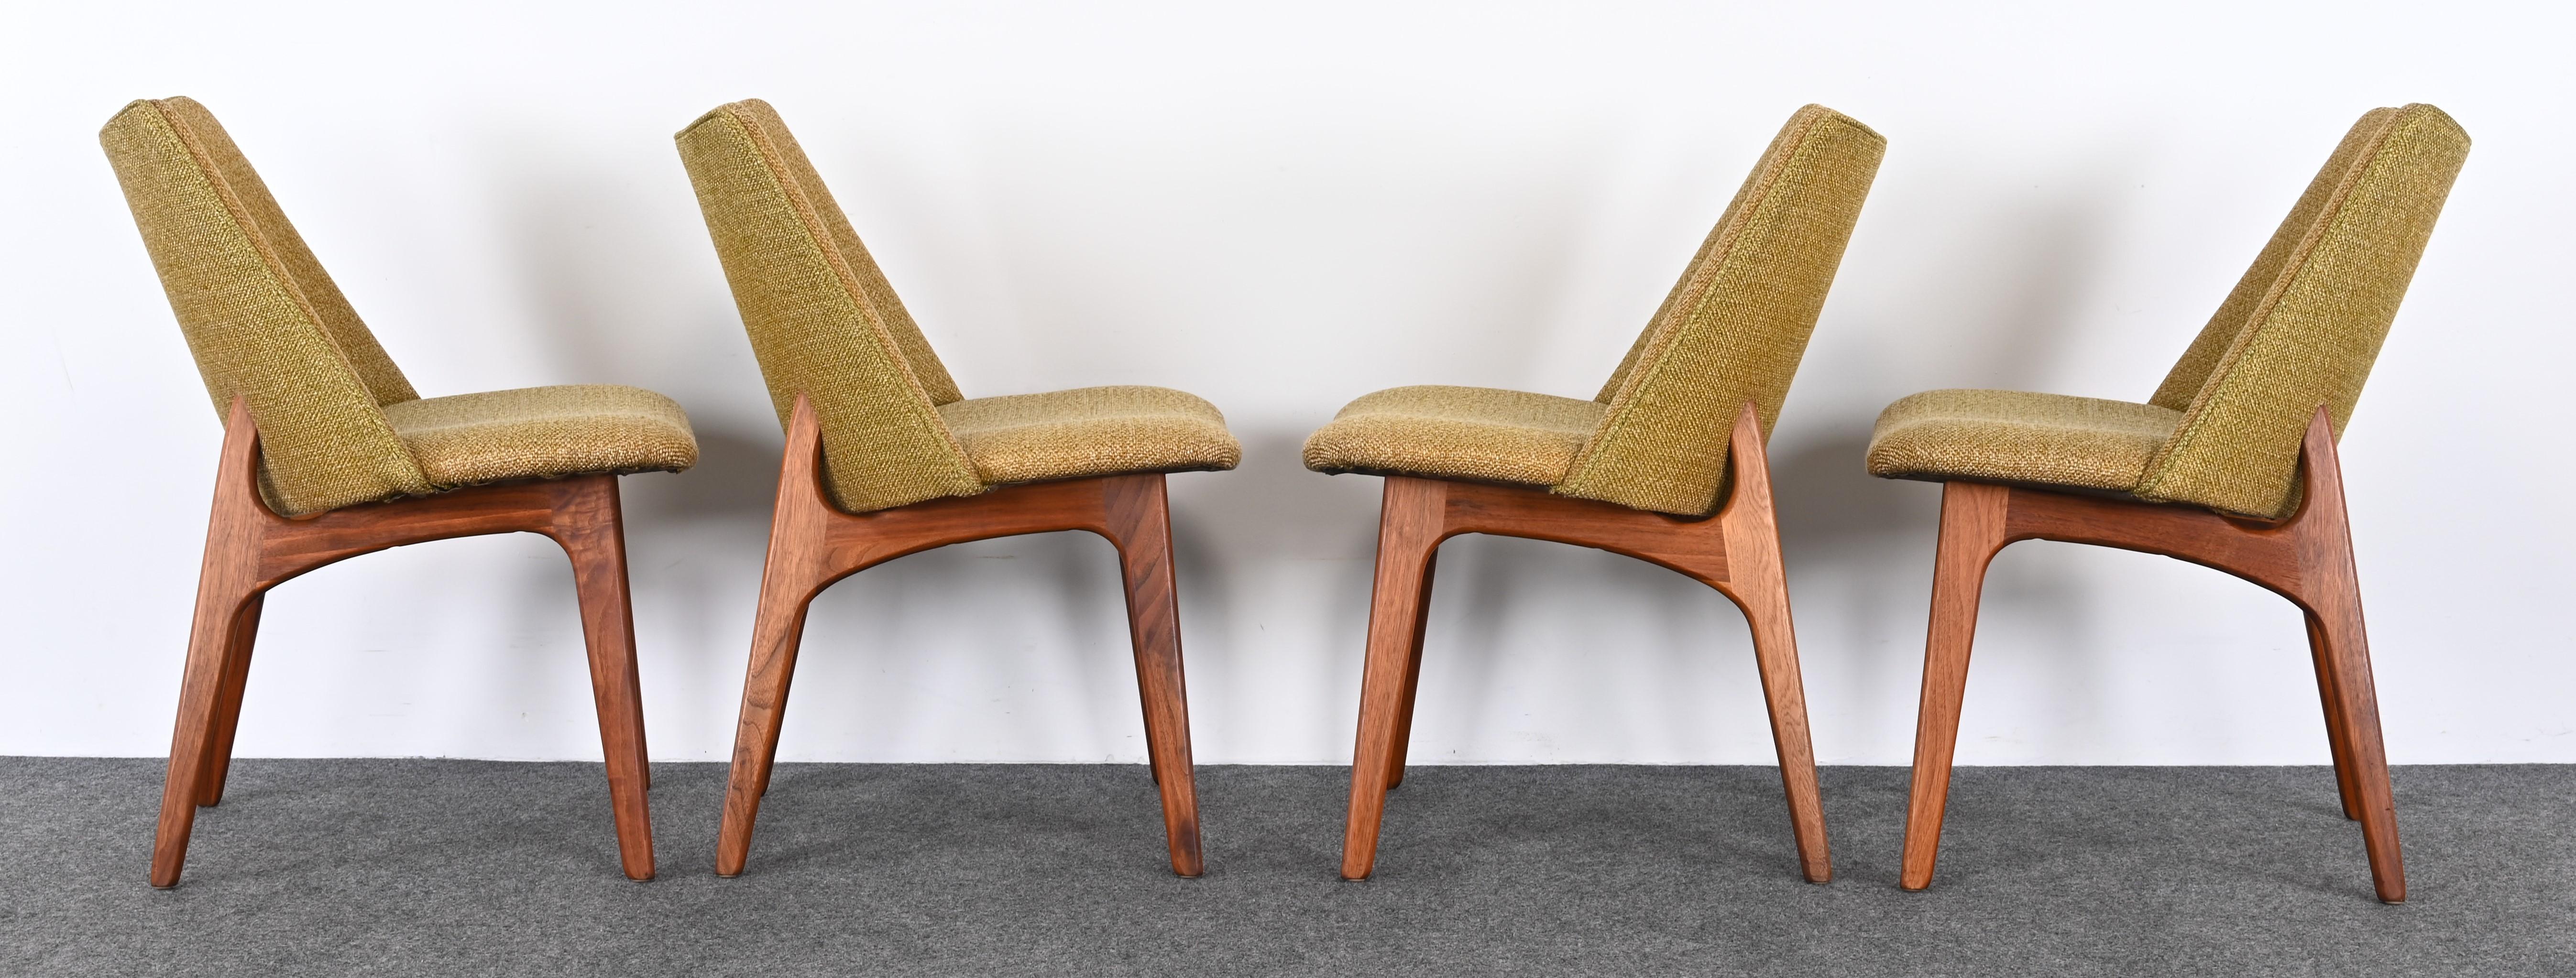 Mid-20th Century Set of Six Adrian Pearsall Dining Chairs Model 2418-C and 2416-C, 1960s